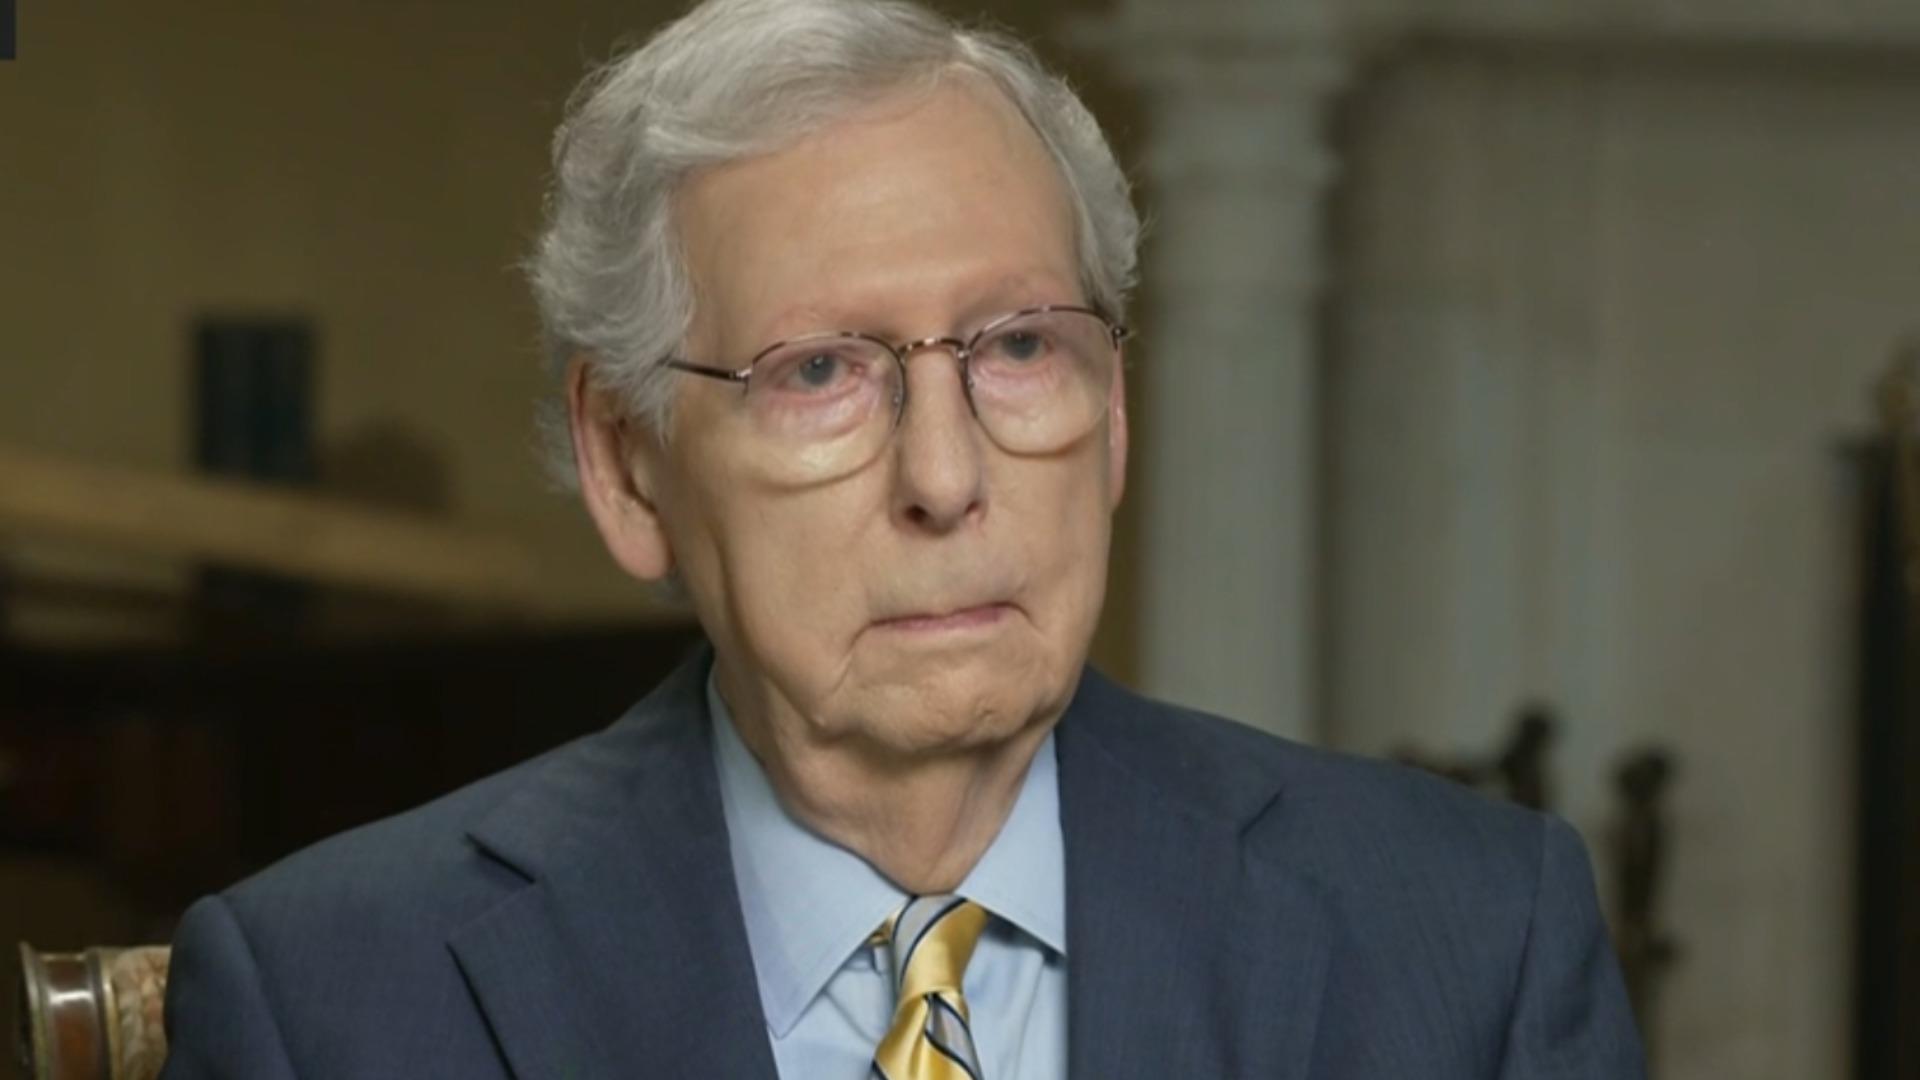 McConnell says university presidents need to 